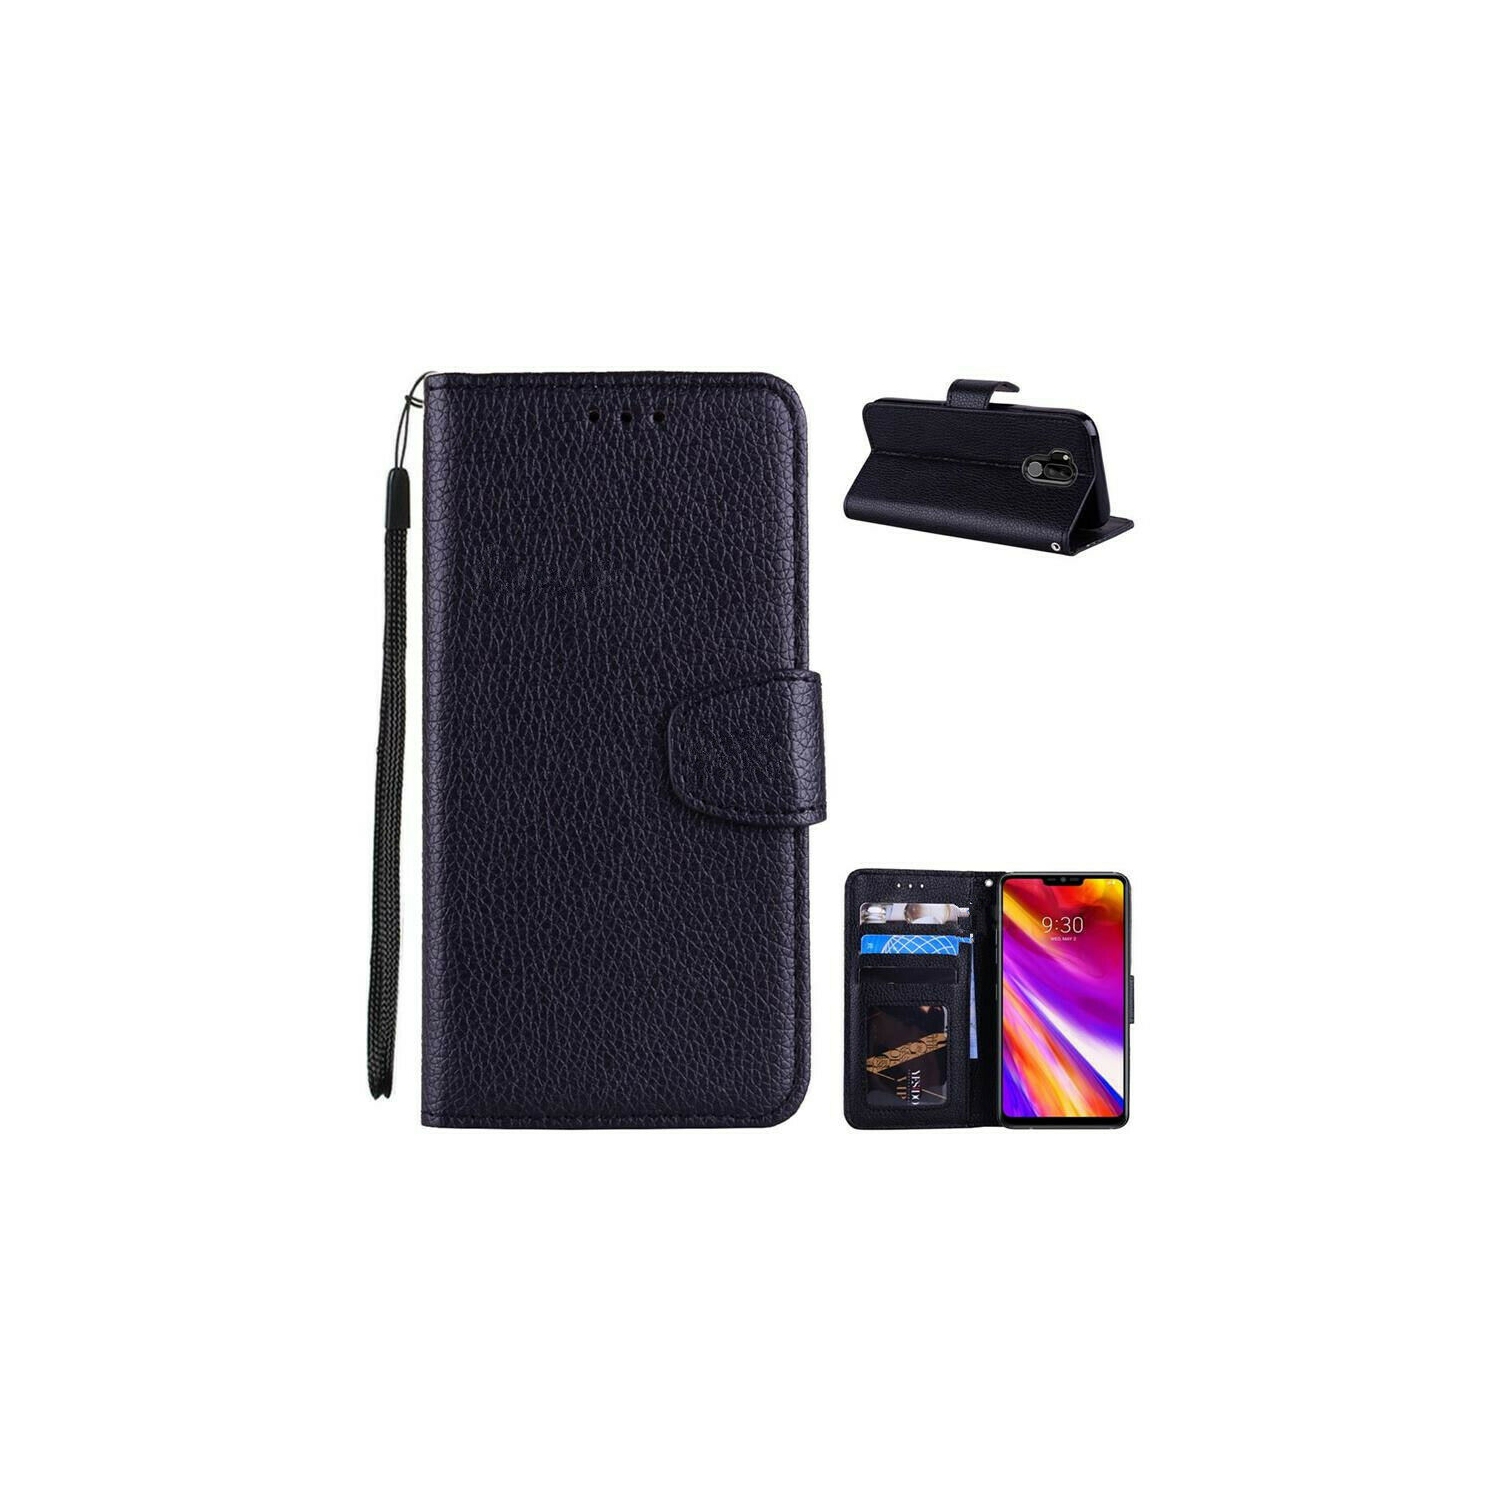 [CS] LG G7 ThinQ / G7 One Case, Magnetic Leather Folio Wallet Flip Case Cover with Card Slot, Black